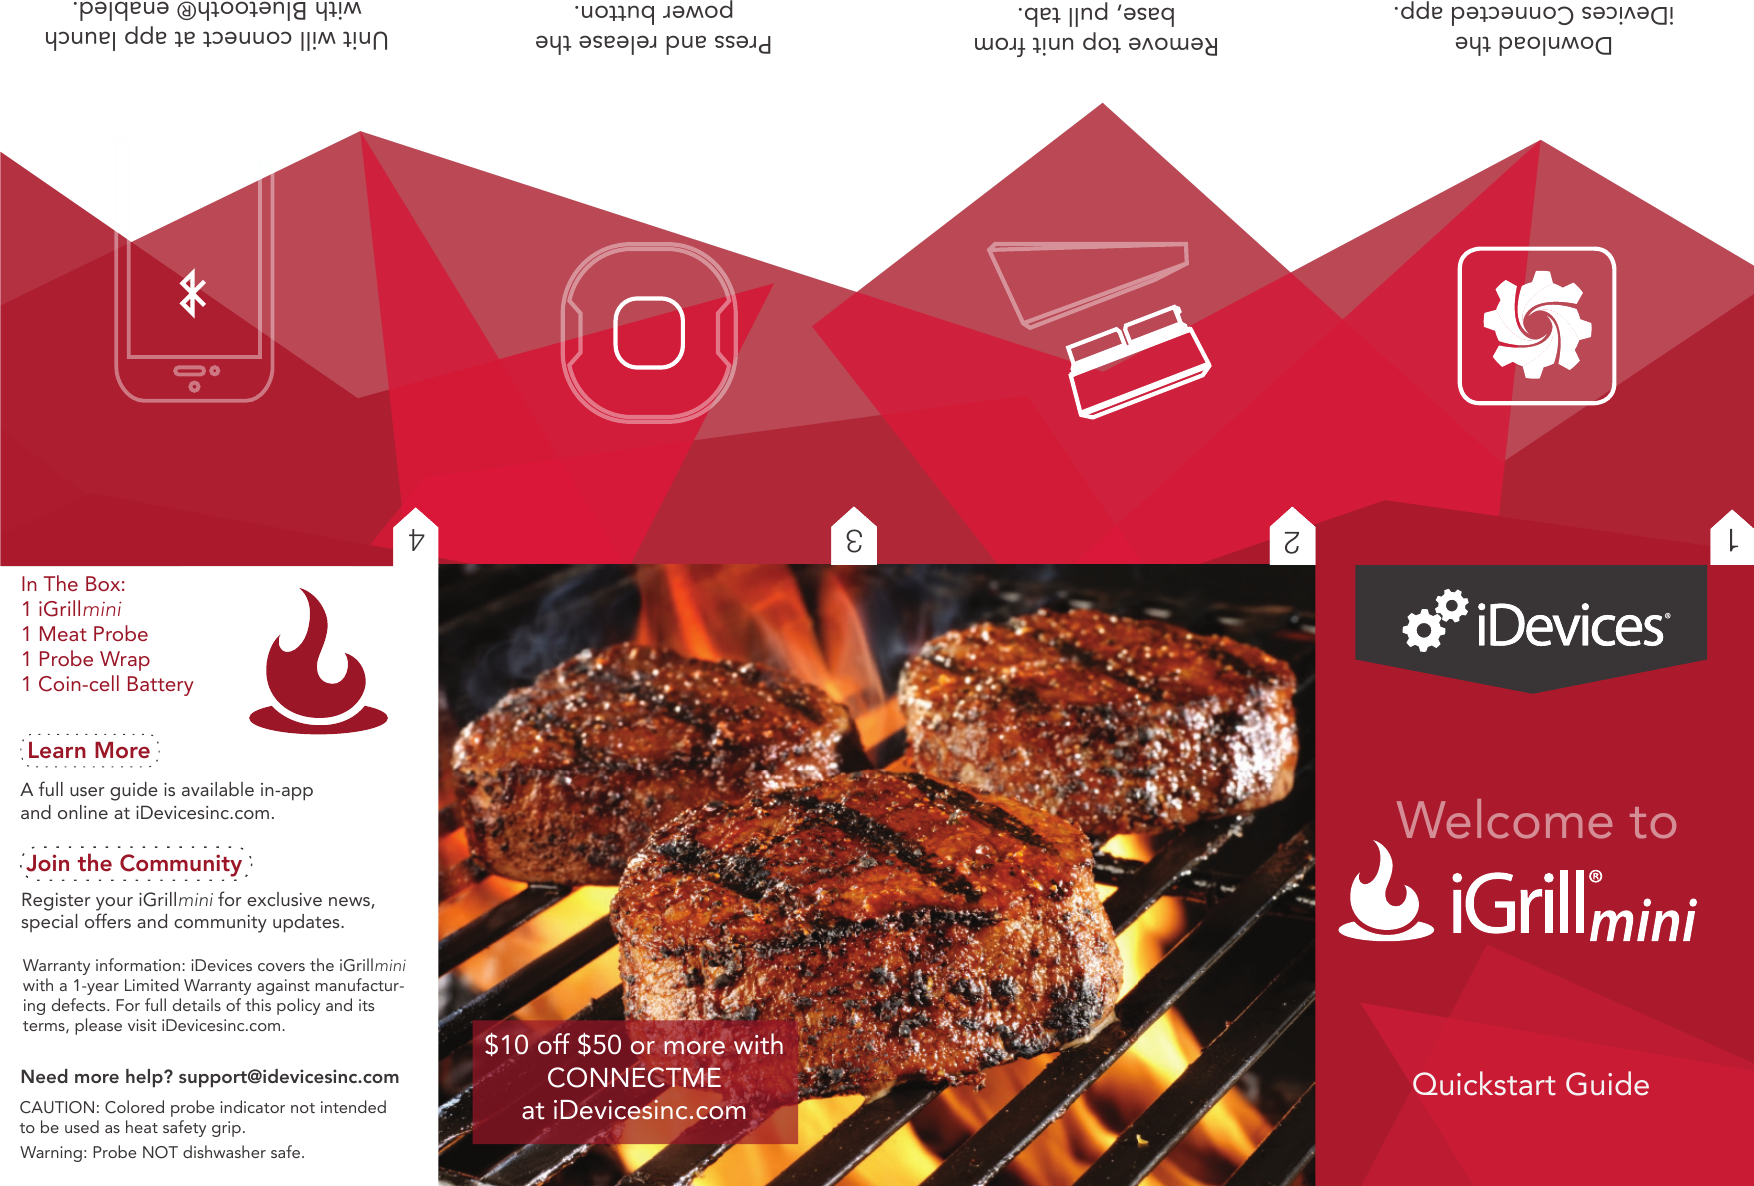 Join the CommunityRegister your iGrillmini for exclusive news, special offers and community updates.Need more help? support@idevicesinc.comLearn MoreA full user guide is available in-app and online at iDevicesinc.com.Warning: Probe NOT dishwasher safe.In The Box:1 iGrillmini 1 Meat Probe1 Probe Wrap1 Coin-cell BatteryWarranty information: iDevices covers the iGrillmini with a 1-year Limited Warranty against manufactur-ing defects. For full details of this policy and its terms, please visit iDevicesinc.com.CAUTION: Colored probe indicator not intended to be used as heat safety grip.Welcome toQuickstart Guide$10 off $50 or more with CONNECTME at iDevicesinc.comRemove top unit from base, pull tab.Download the iDevices Connected app. Unit will connect at app launchwith Bluetooth® enabled.34 Press and release the power button.